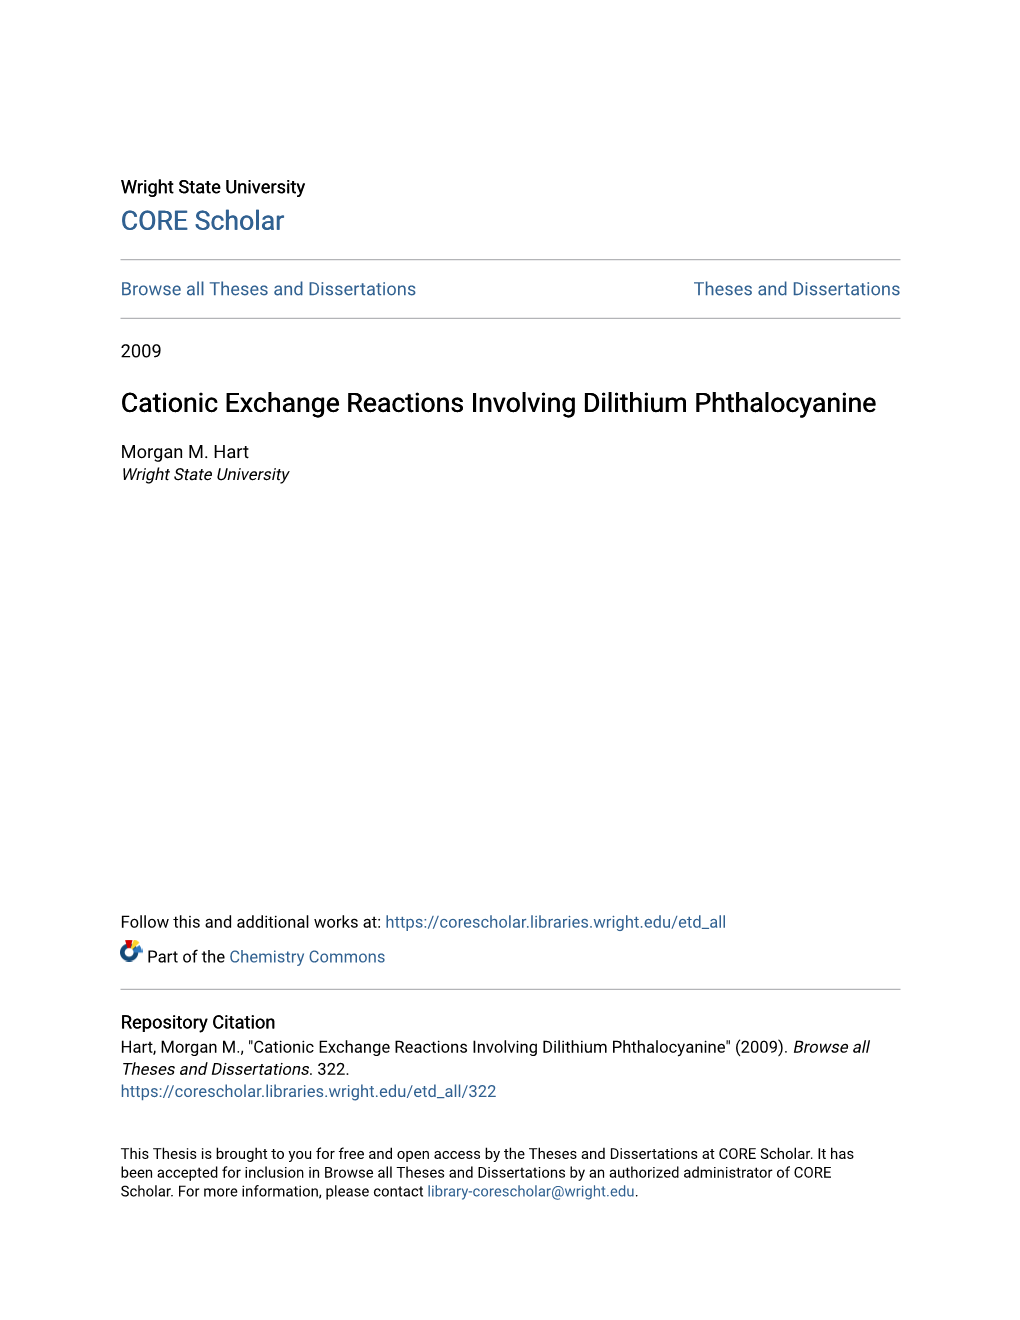 Cationic Exchange Reactions Involving Dilithium Phthalocyanine